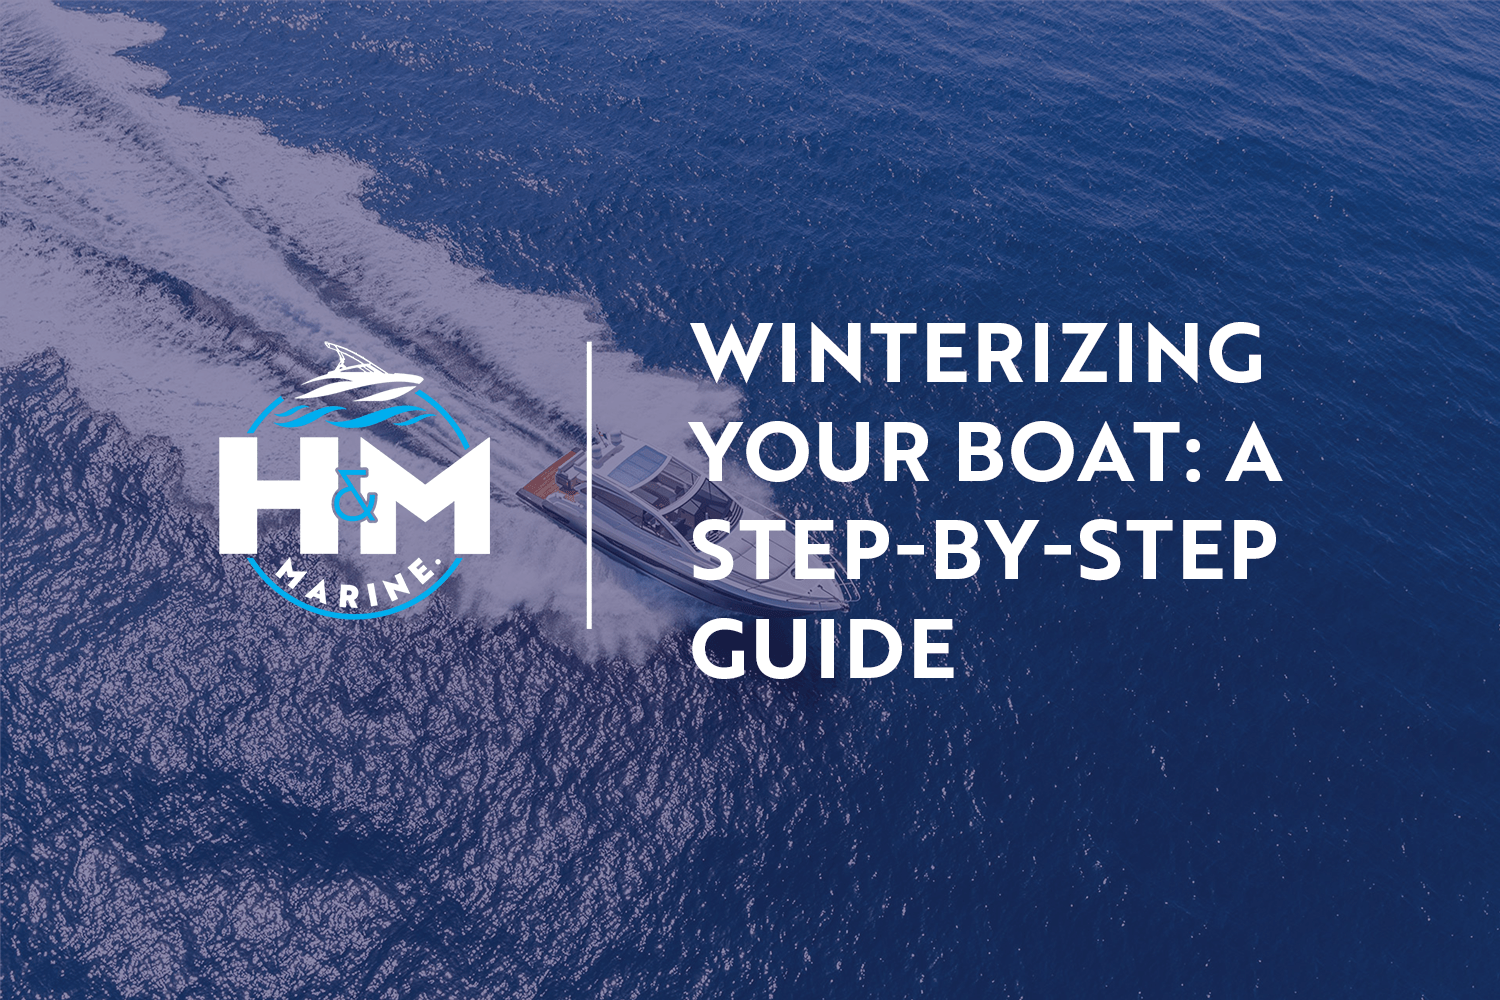 Winterizing Your Boat: A Step-by-Step Guide